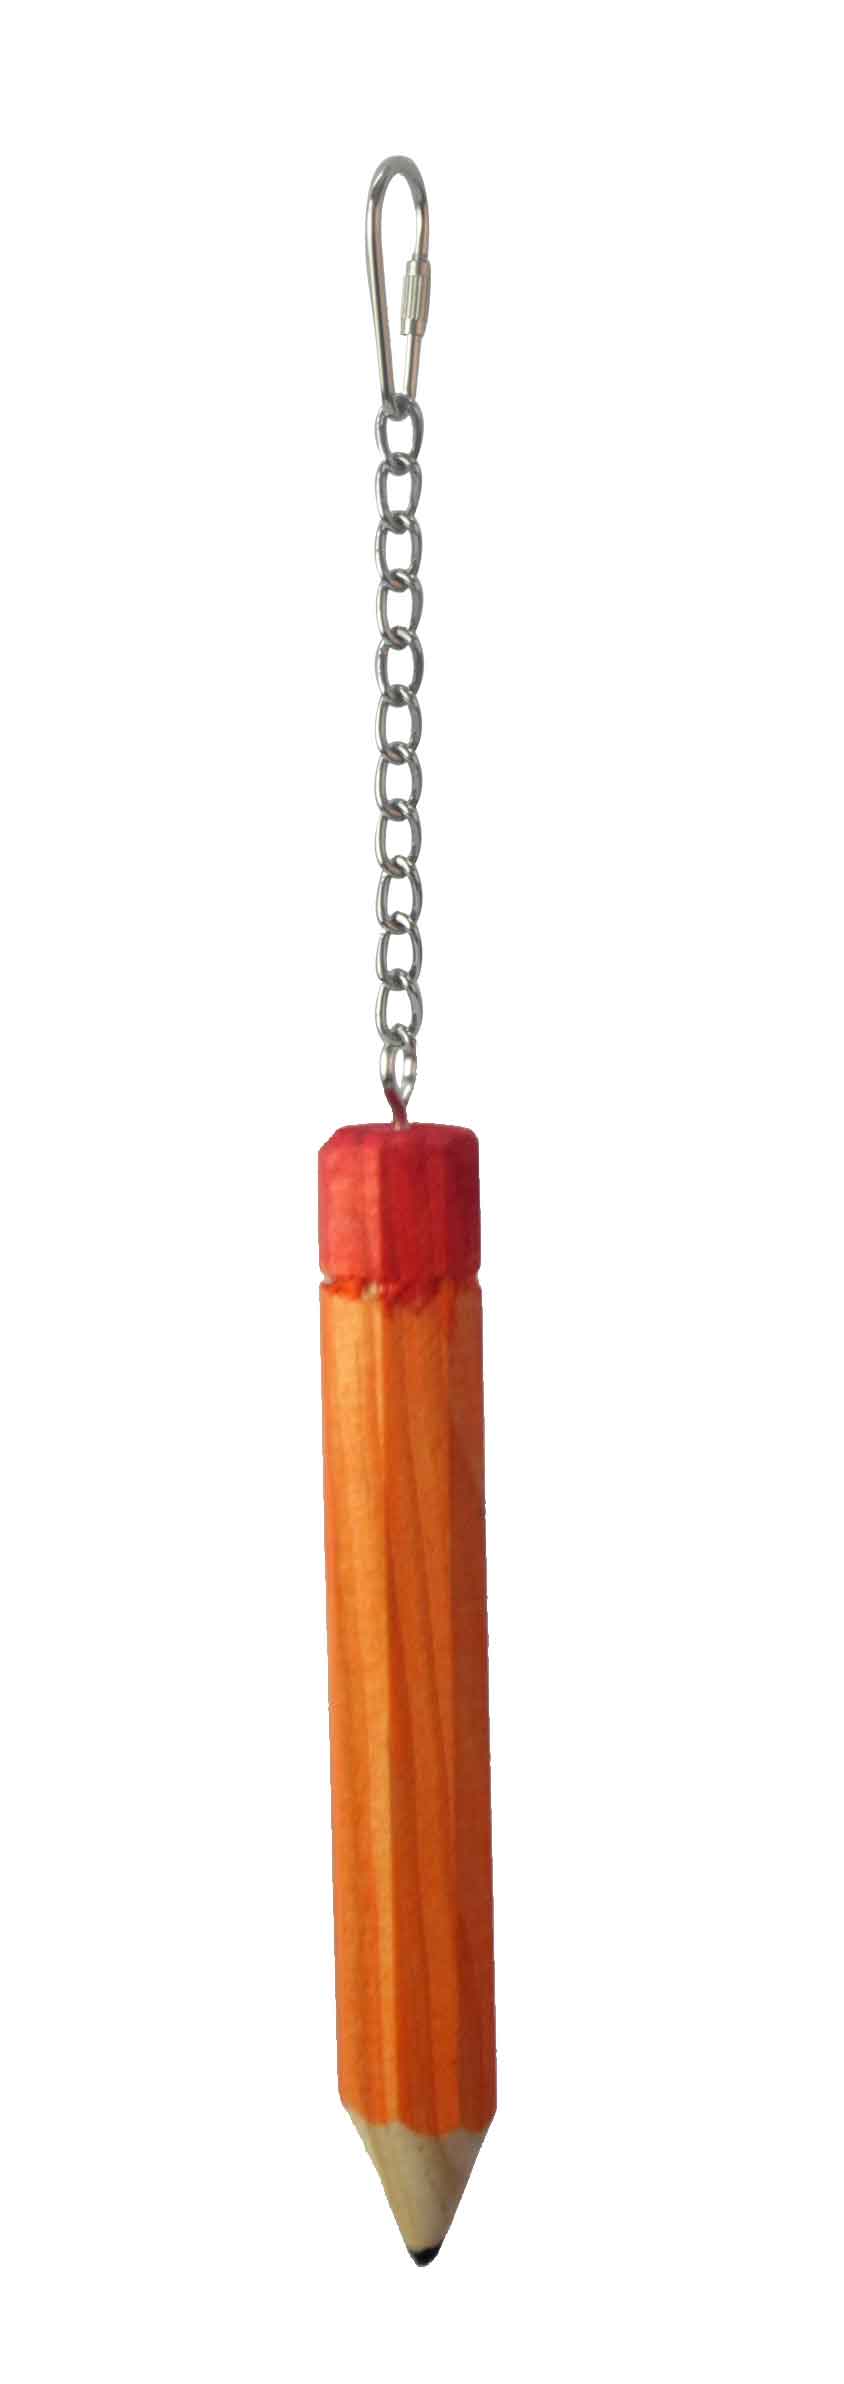 Giant Pencil Parrot Toy - Pet Products R Us